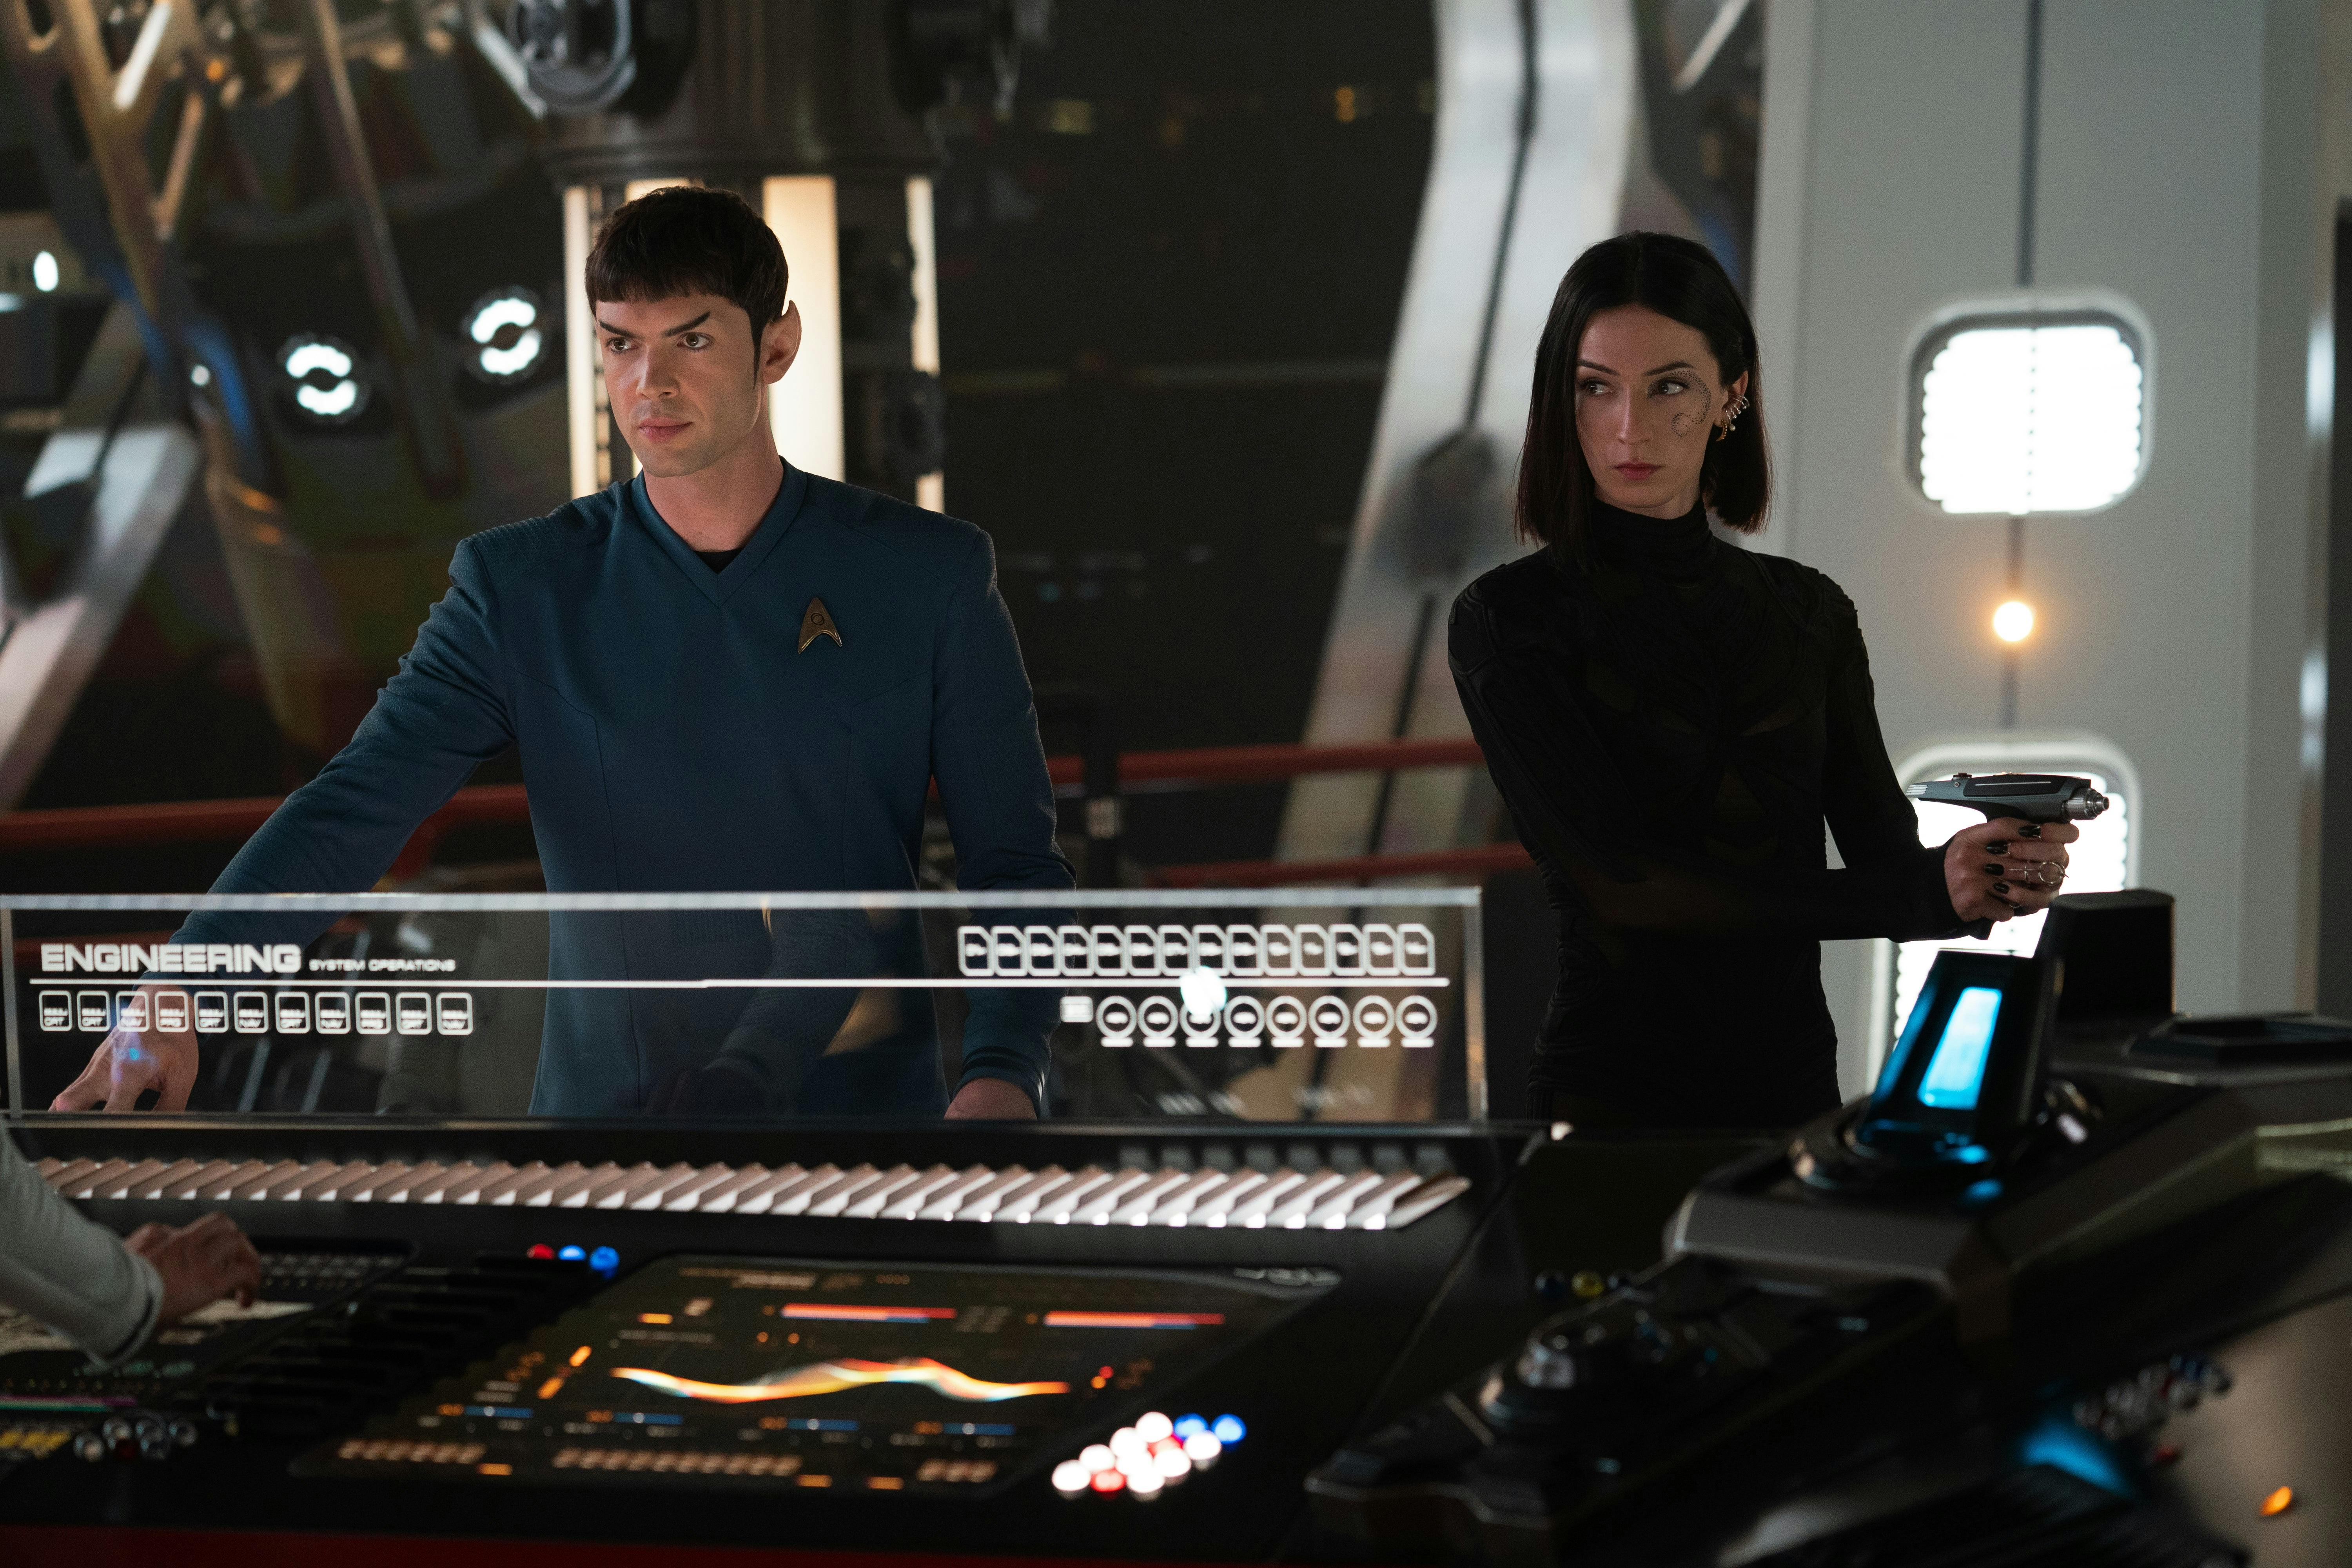 Spock (Ethan Peck) stands next to a console as Dr. Aspen (Jesse James Keitel) stands nearby, holding a phaser.